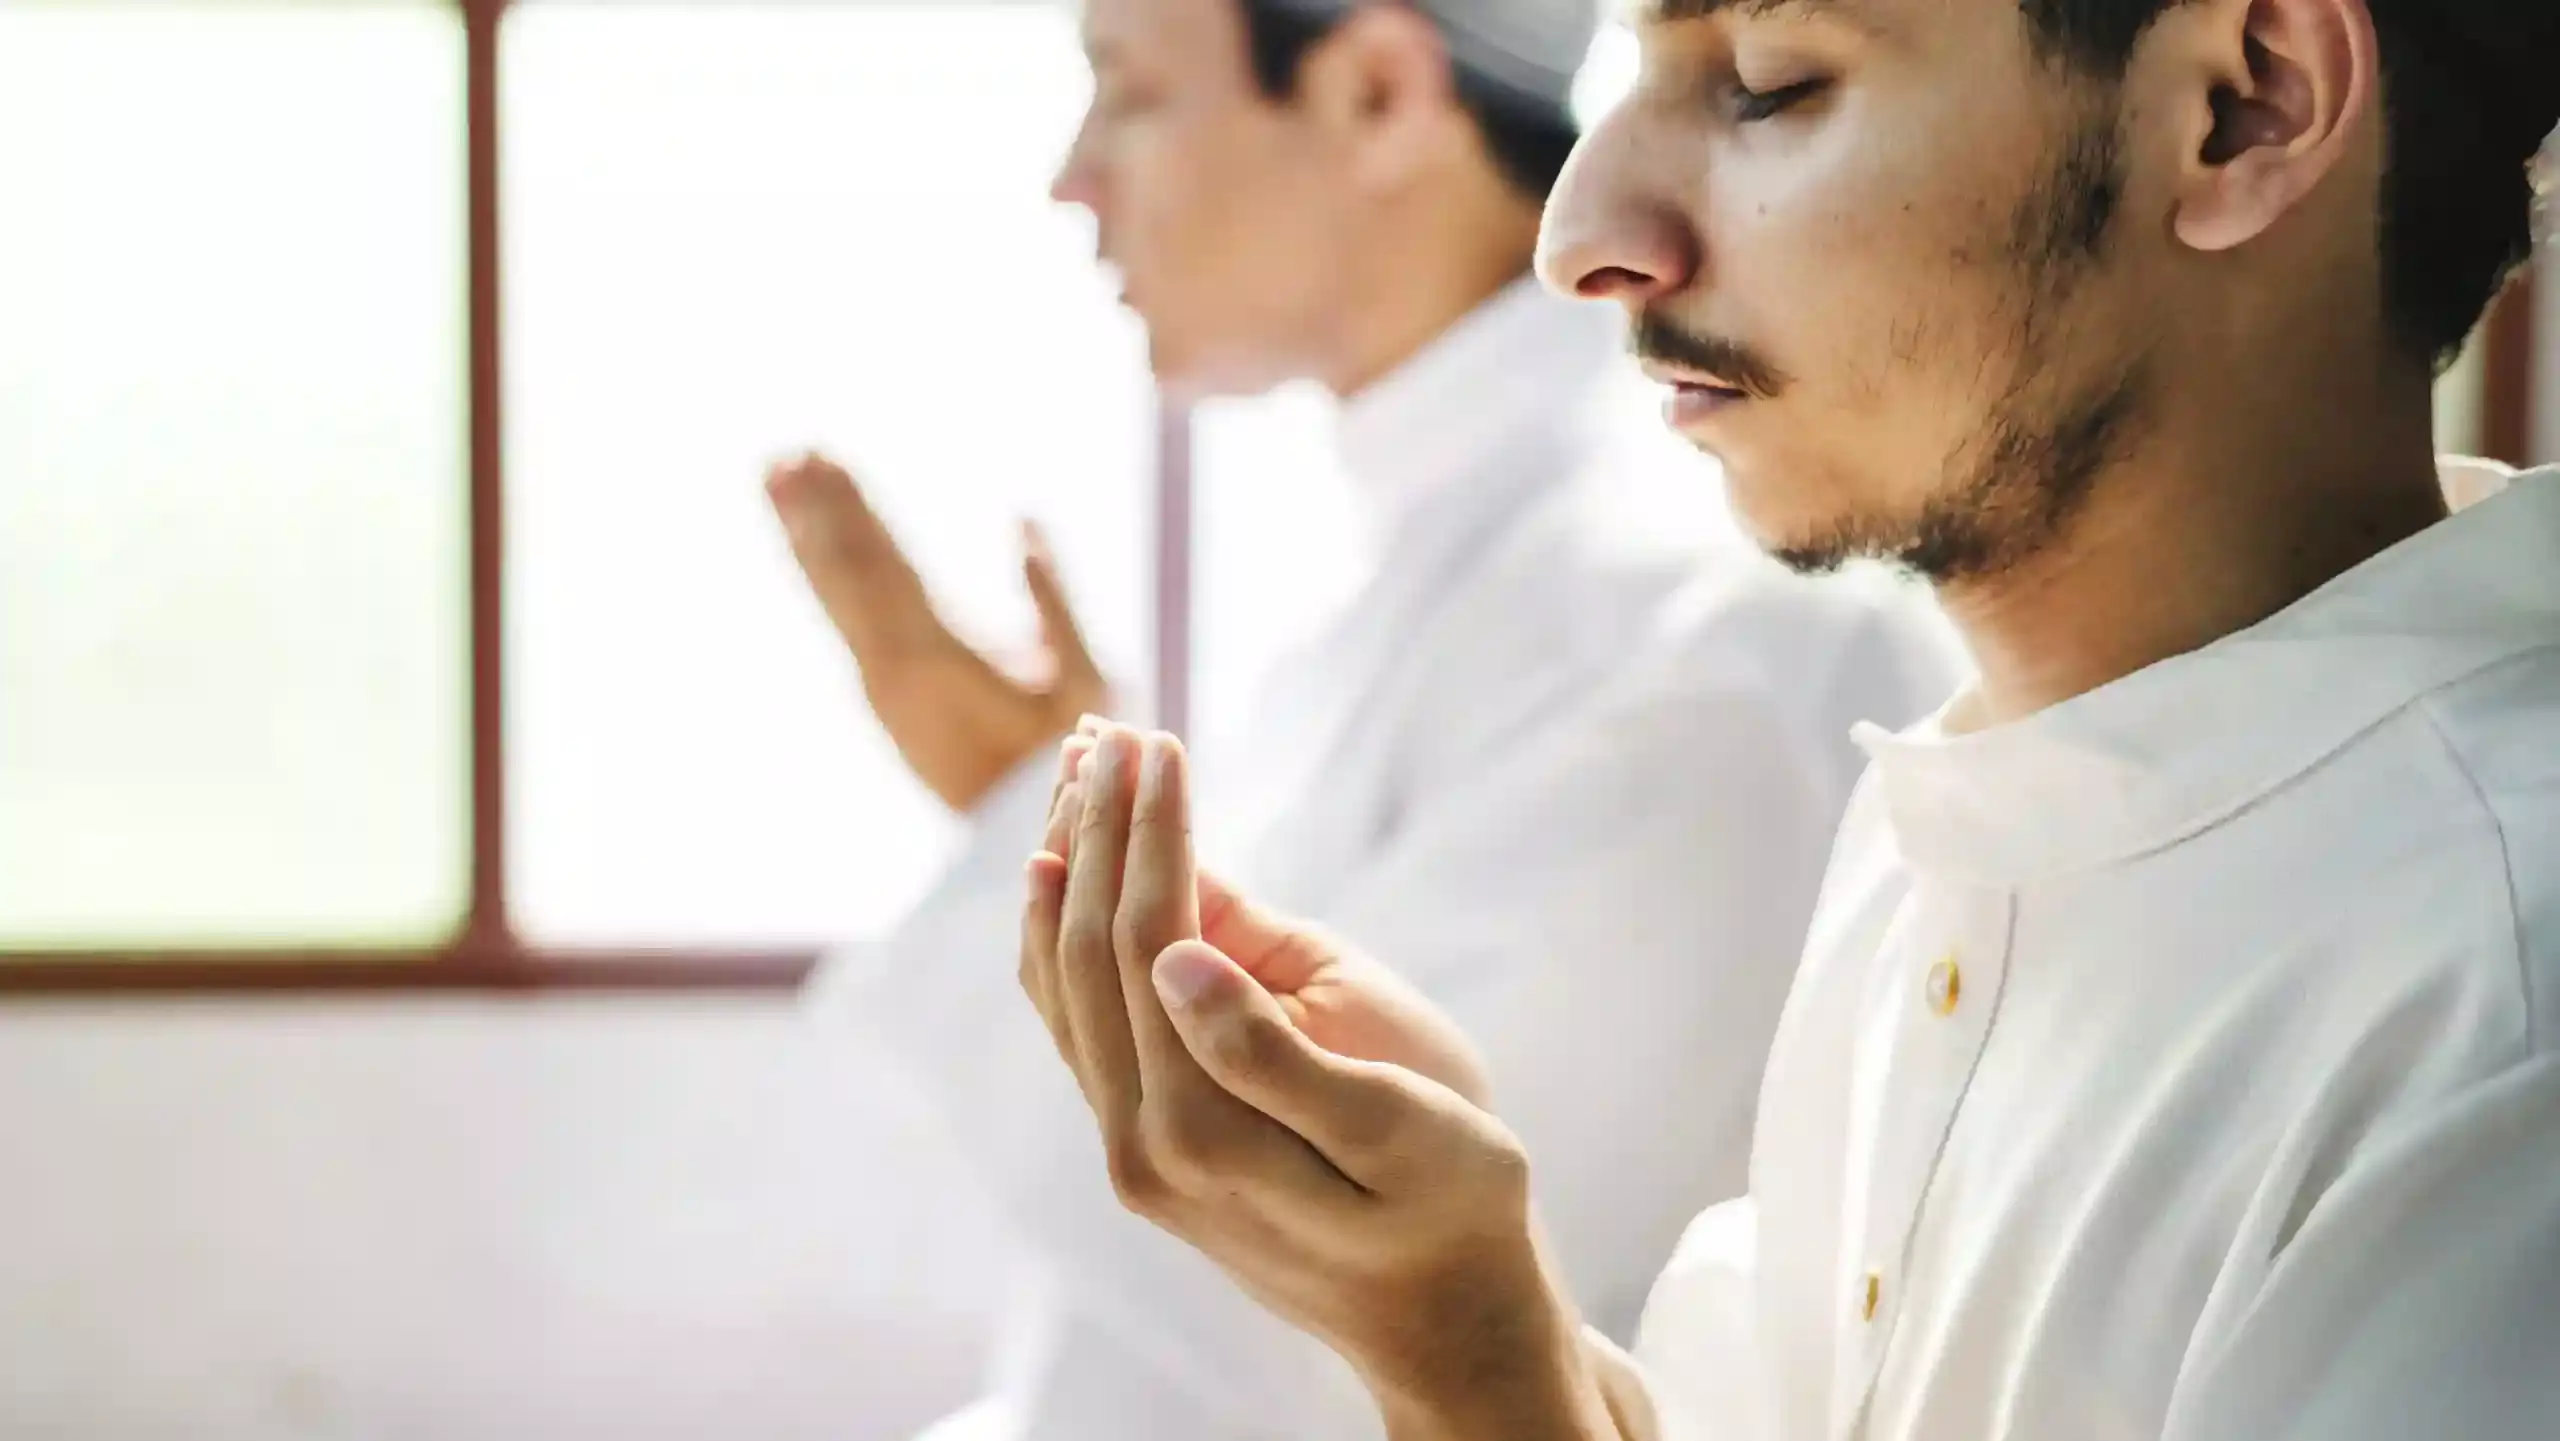 HOW TO MAKE THE MOST OF THIS RAMADHAN